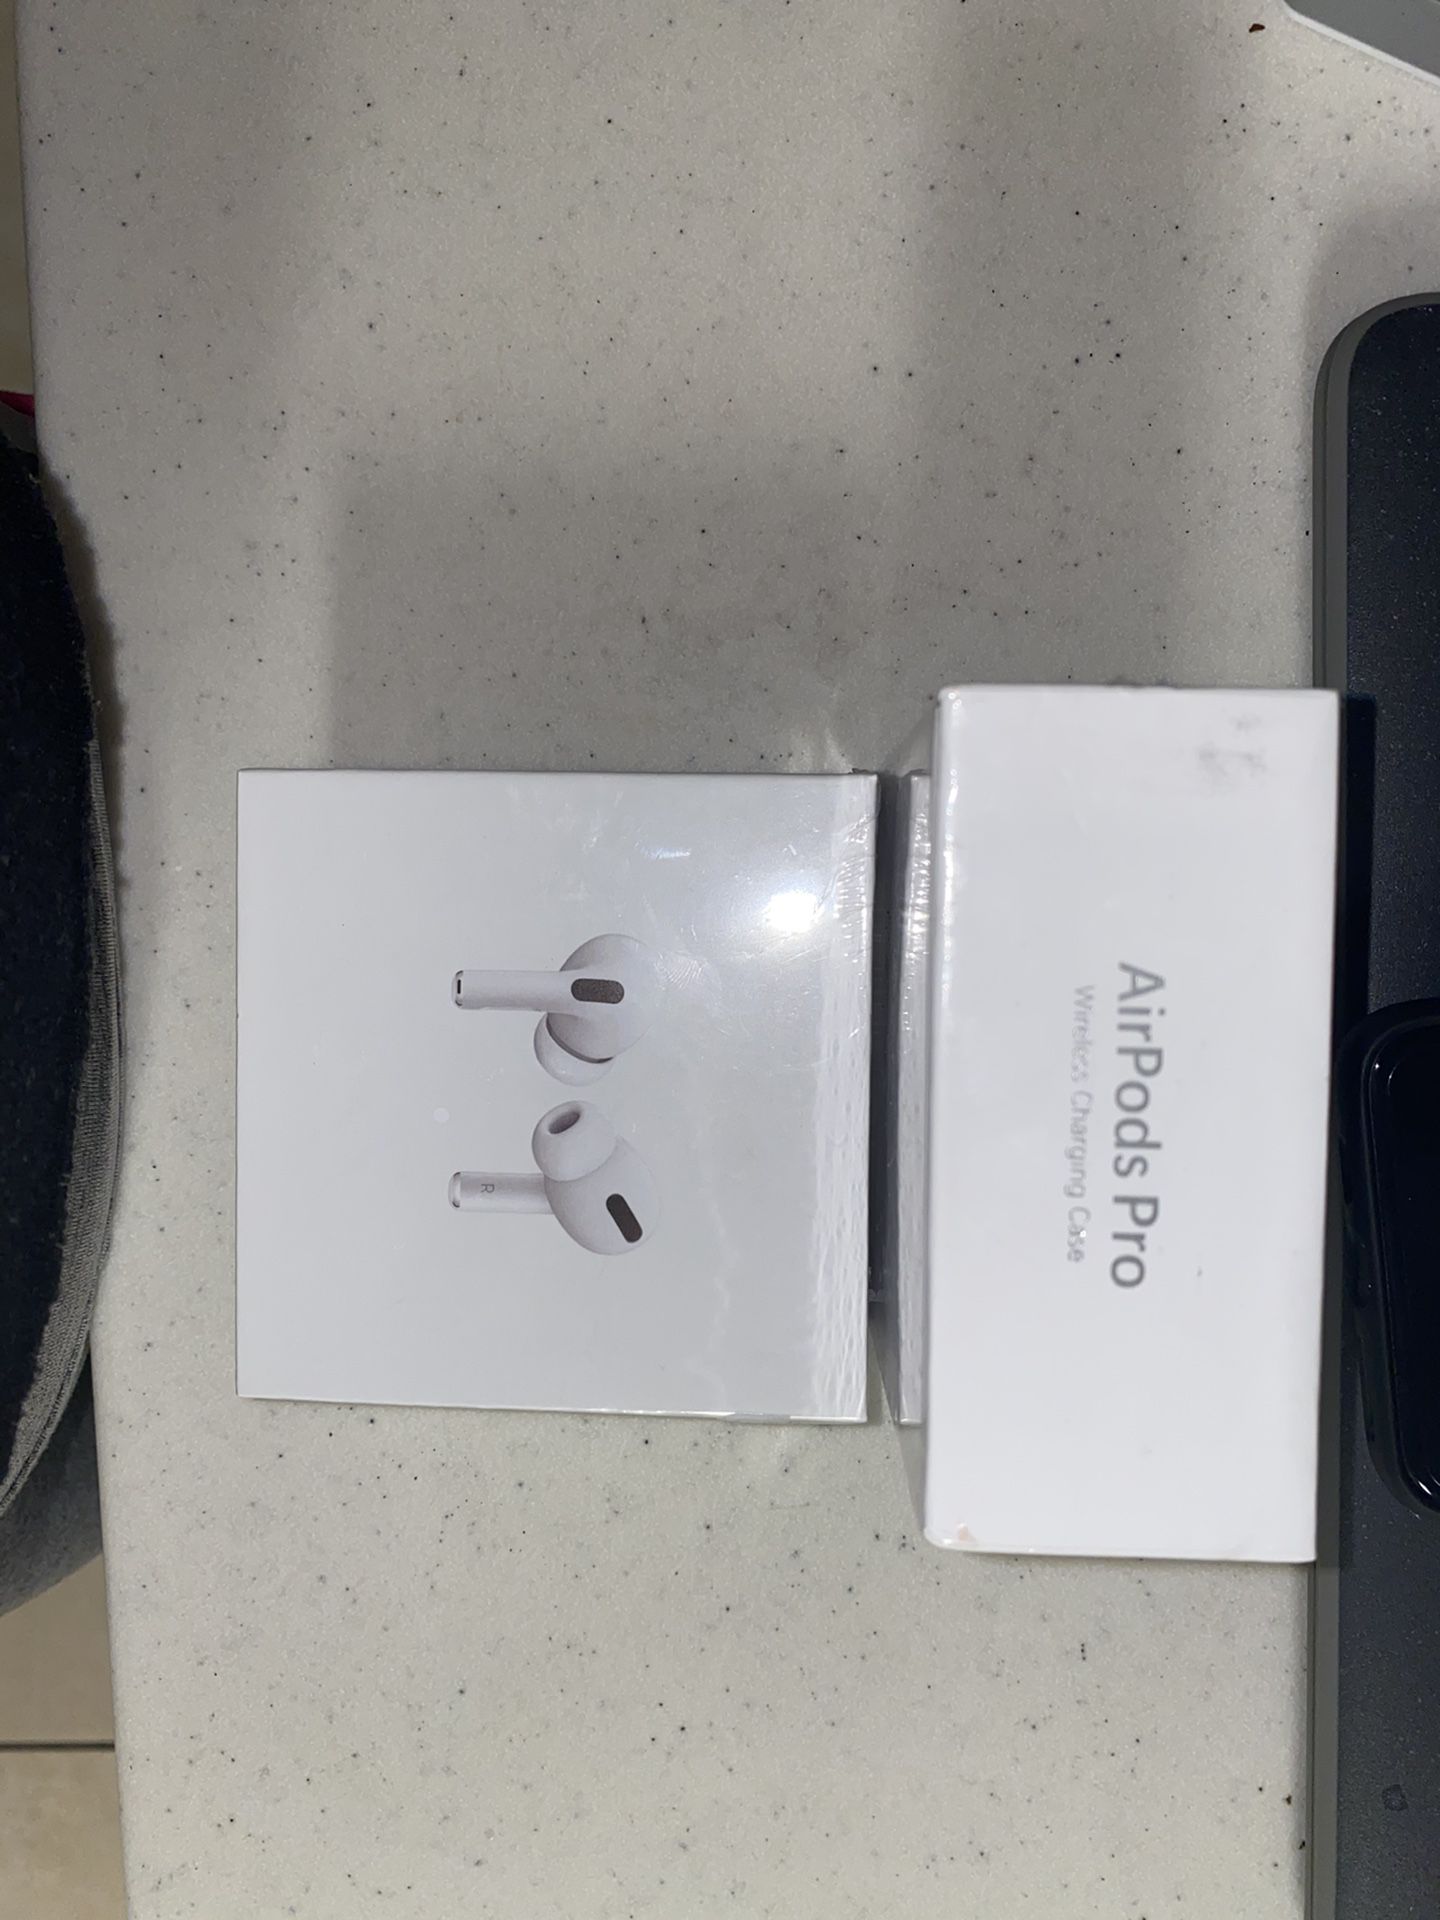 Air Pod Pros New Never opened